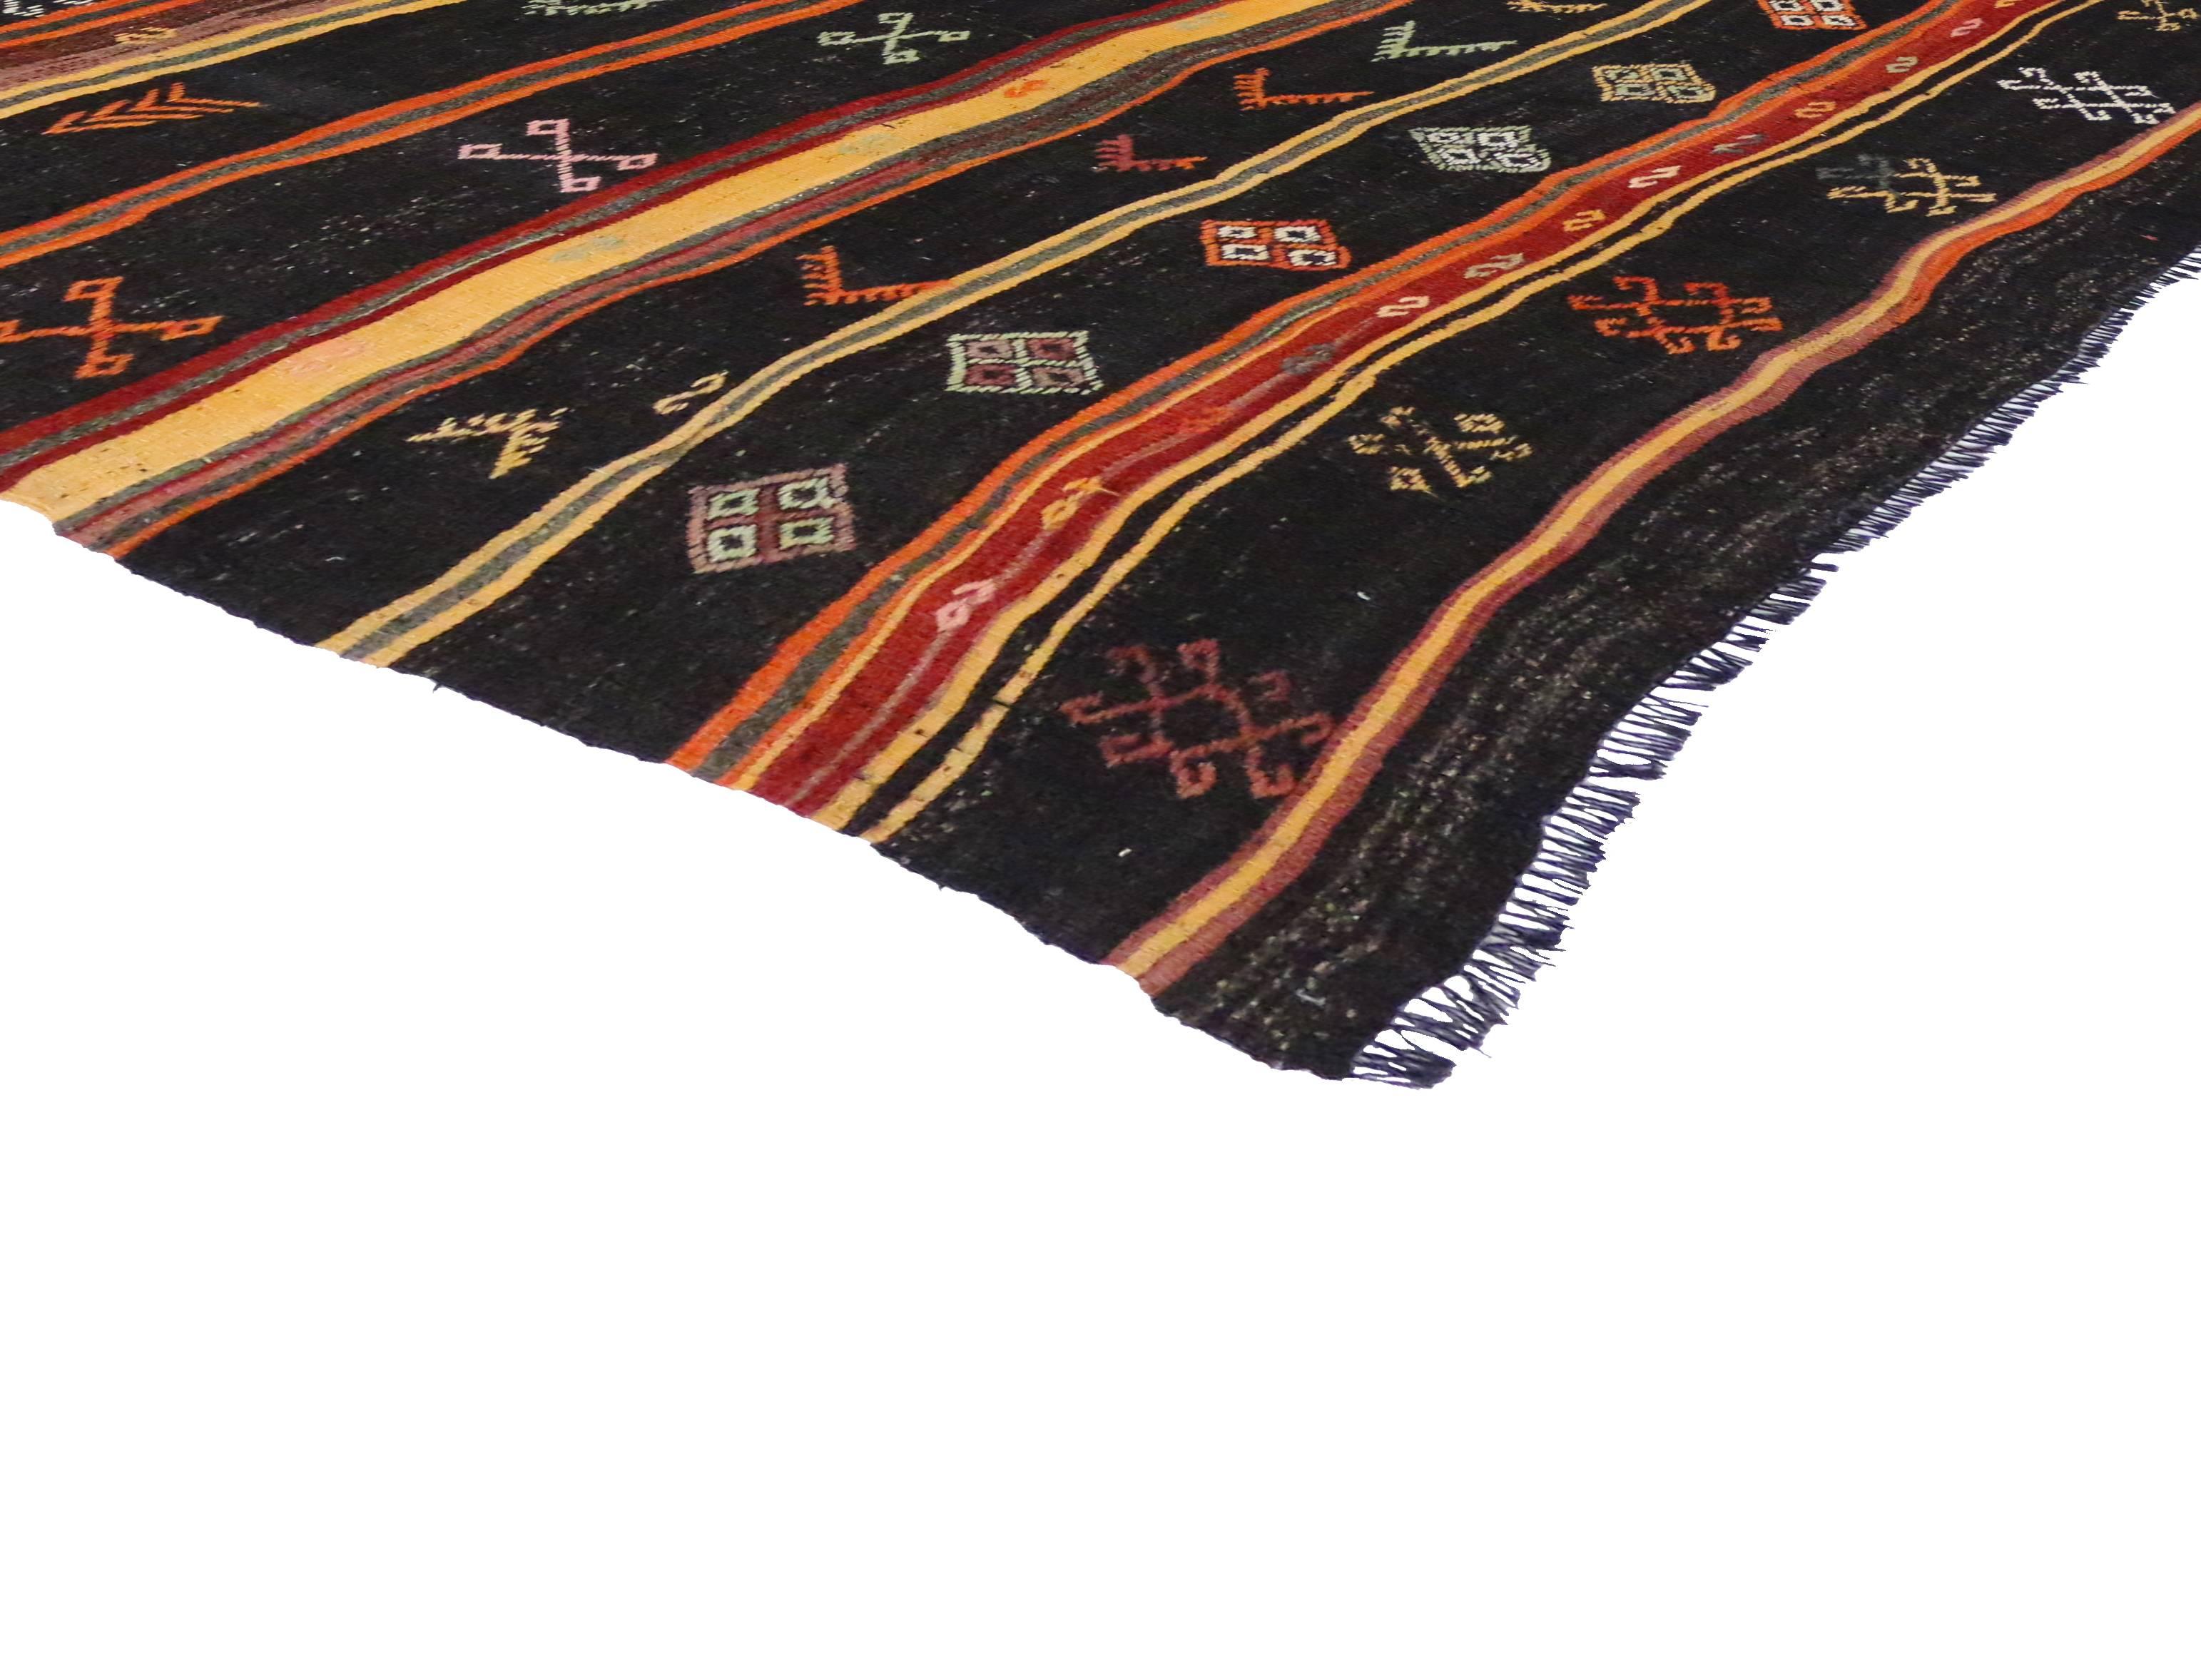 Flat-weave Kilims, like this one, are quickly growing in popularity with their warehouse chic and modern Industrial style. Here we have a vintage Turkish Kilim featuring a modern tribal design in a simplistic color palette. Highlighting a repetitive